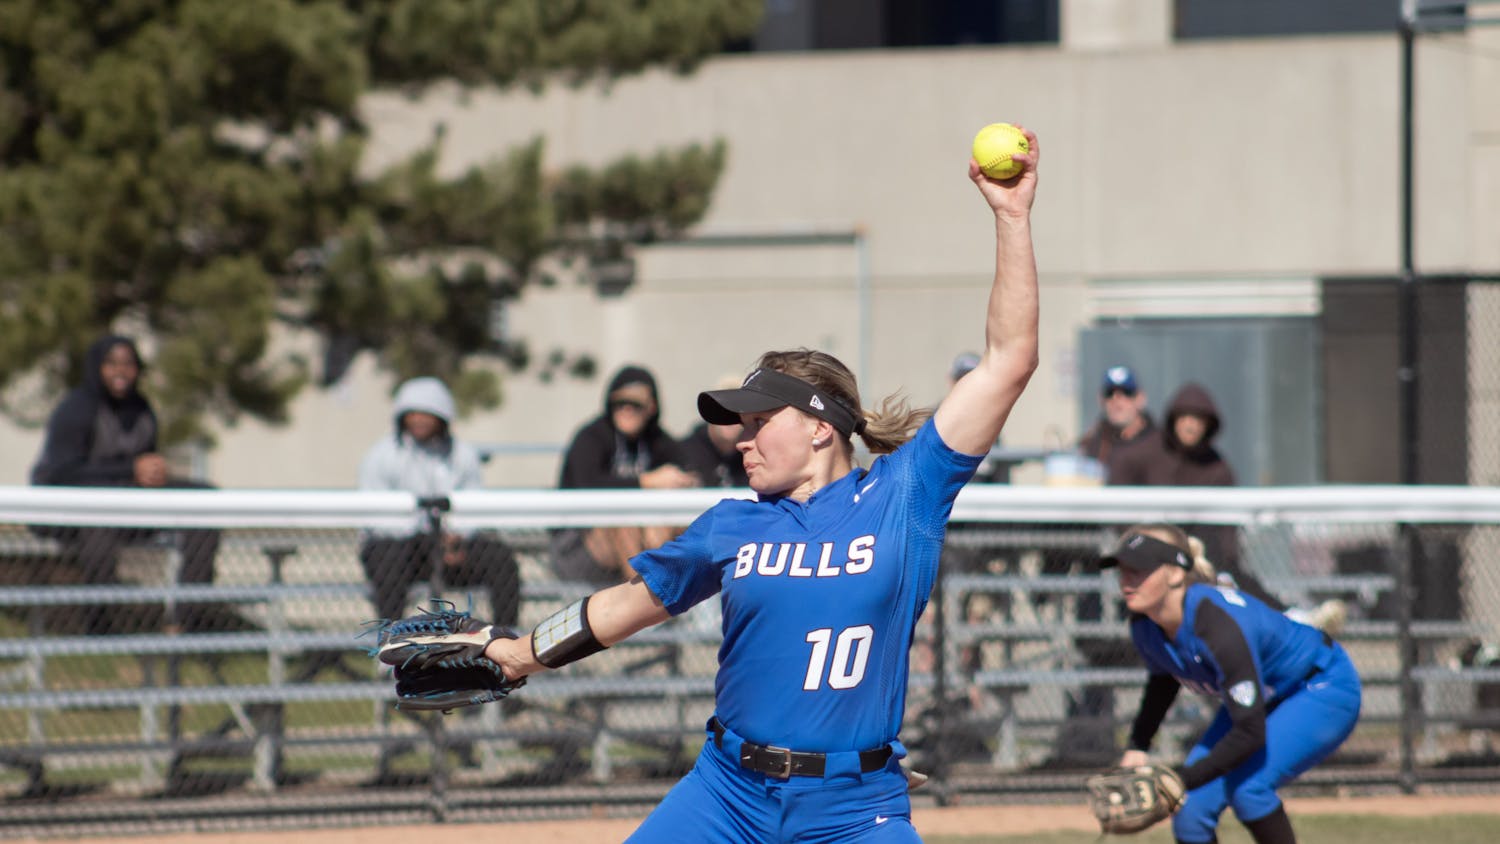 Alexis Lucyshyn, No. 10, throws a pitch at a Bulls home game.